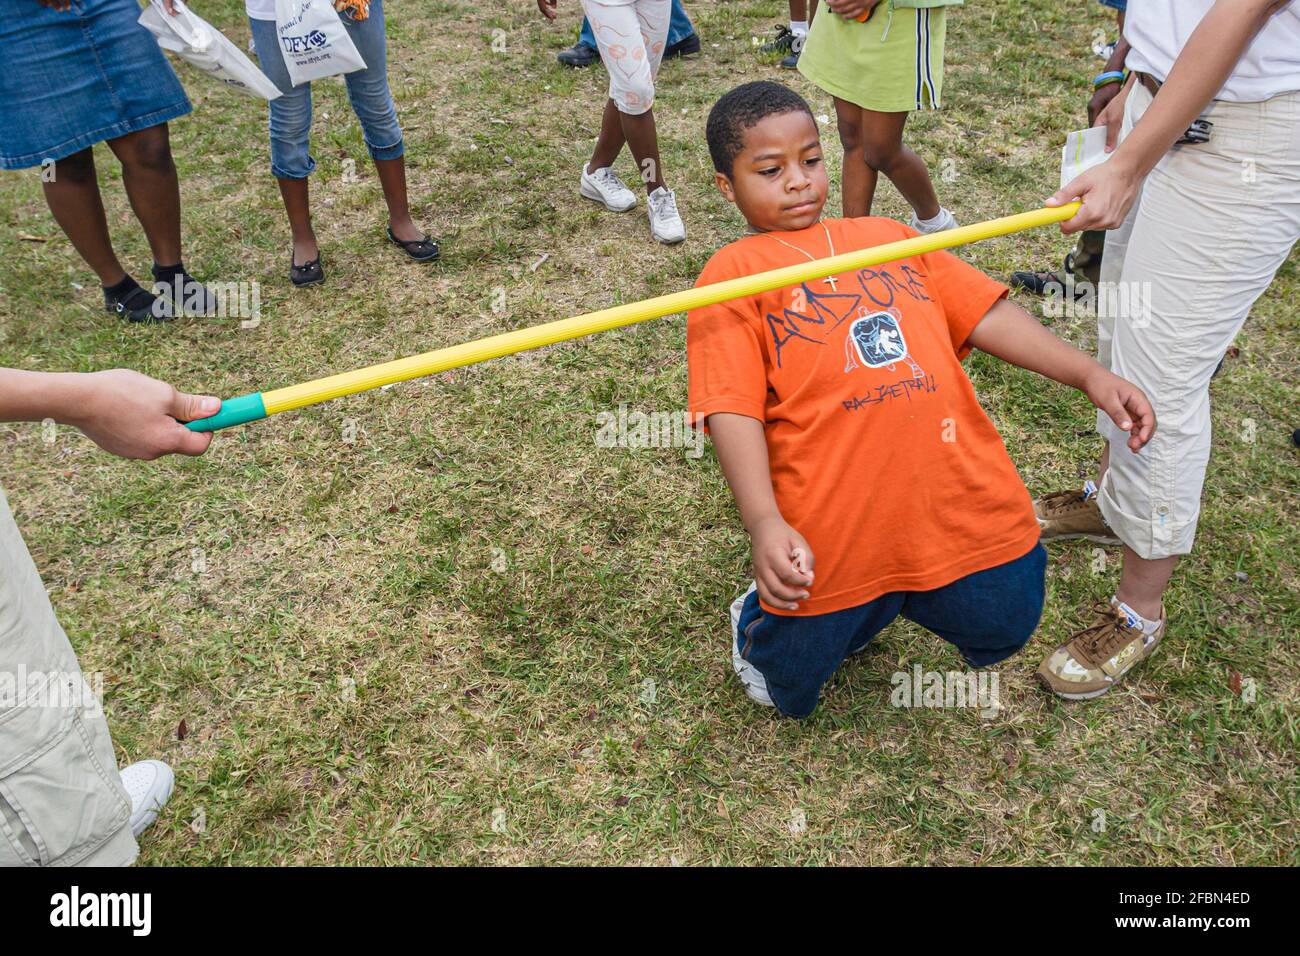 Miami Florida, Tropical Park Drug Free Youth in Town DFYIT, Student Anti-Suchtgruppe Picknick, Black Boy Limbo Contest schiefe Anstrengung unter Bar, Stockfoto